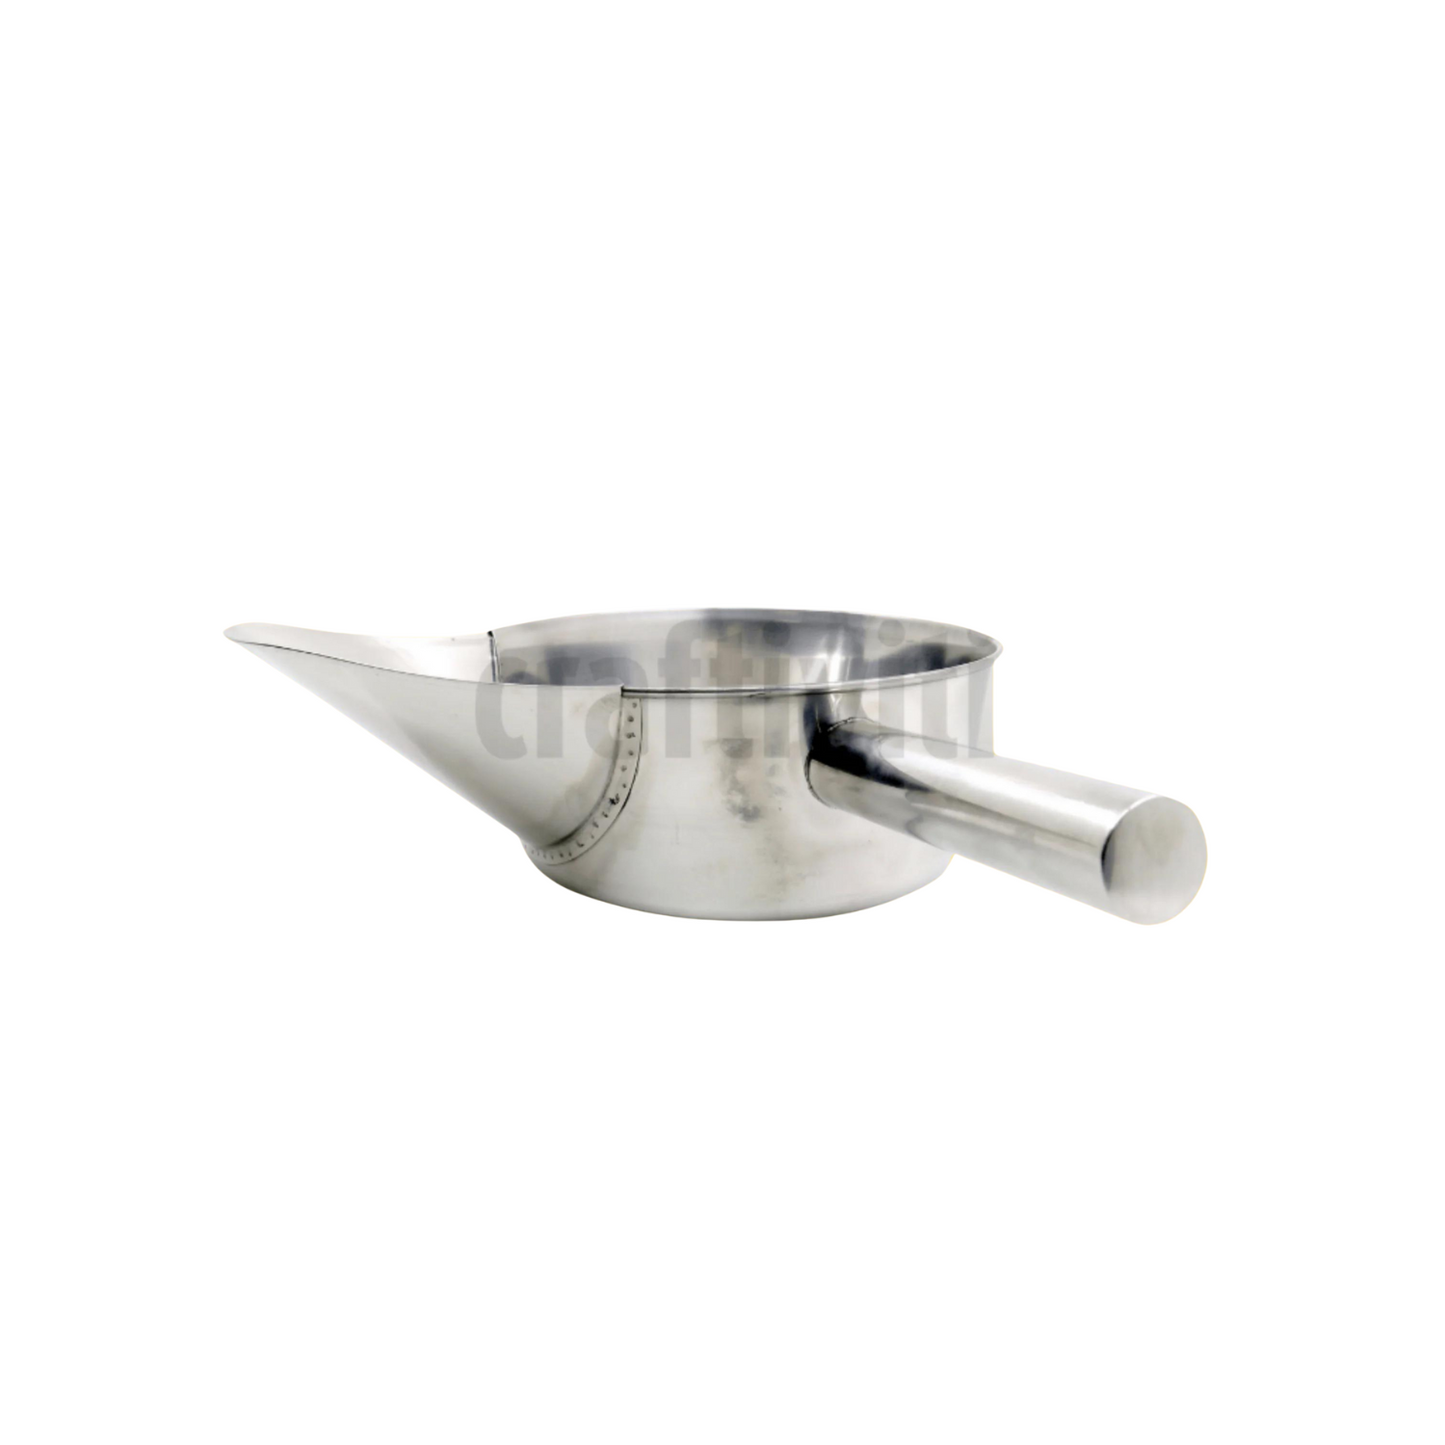 Stainless Steel Wax Pot with Pouring Spout - 19.9cm Diameter